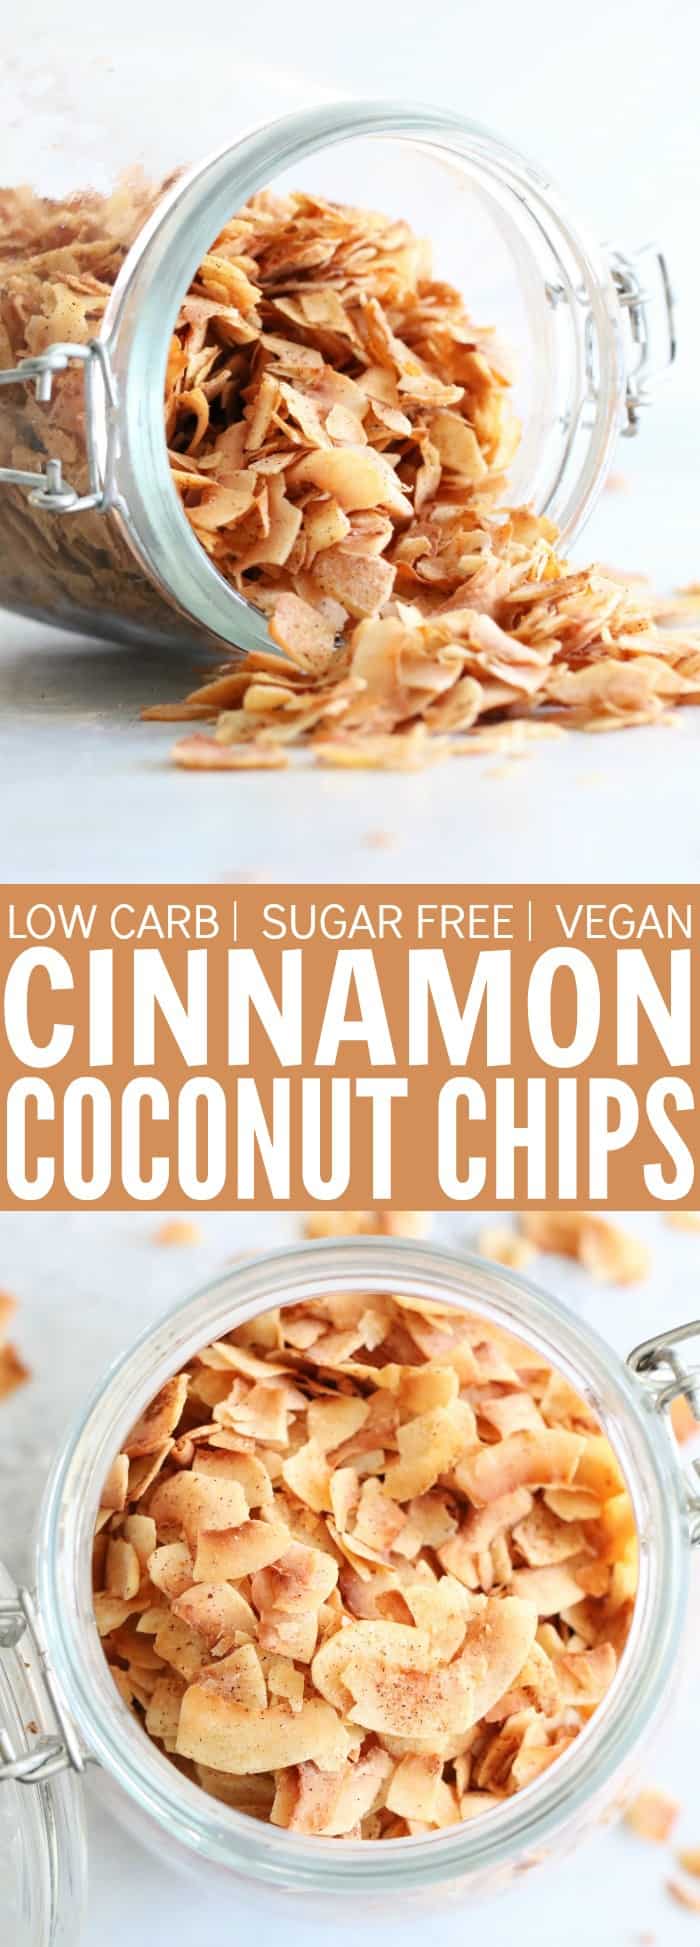 These sweet Cinnamon Coconut Chips are the perfect snack or topping for your smoothie or ice cream! They refined sugar free, vegan, paleo, and gluten free! thetoastedpinenut.com #coconut #chips #glutenfree #dairyfree #paleo #snack #lowcarb #cinnamon #thetoastedpinenut